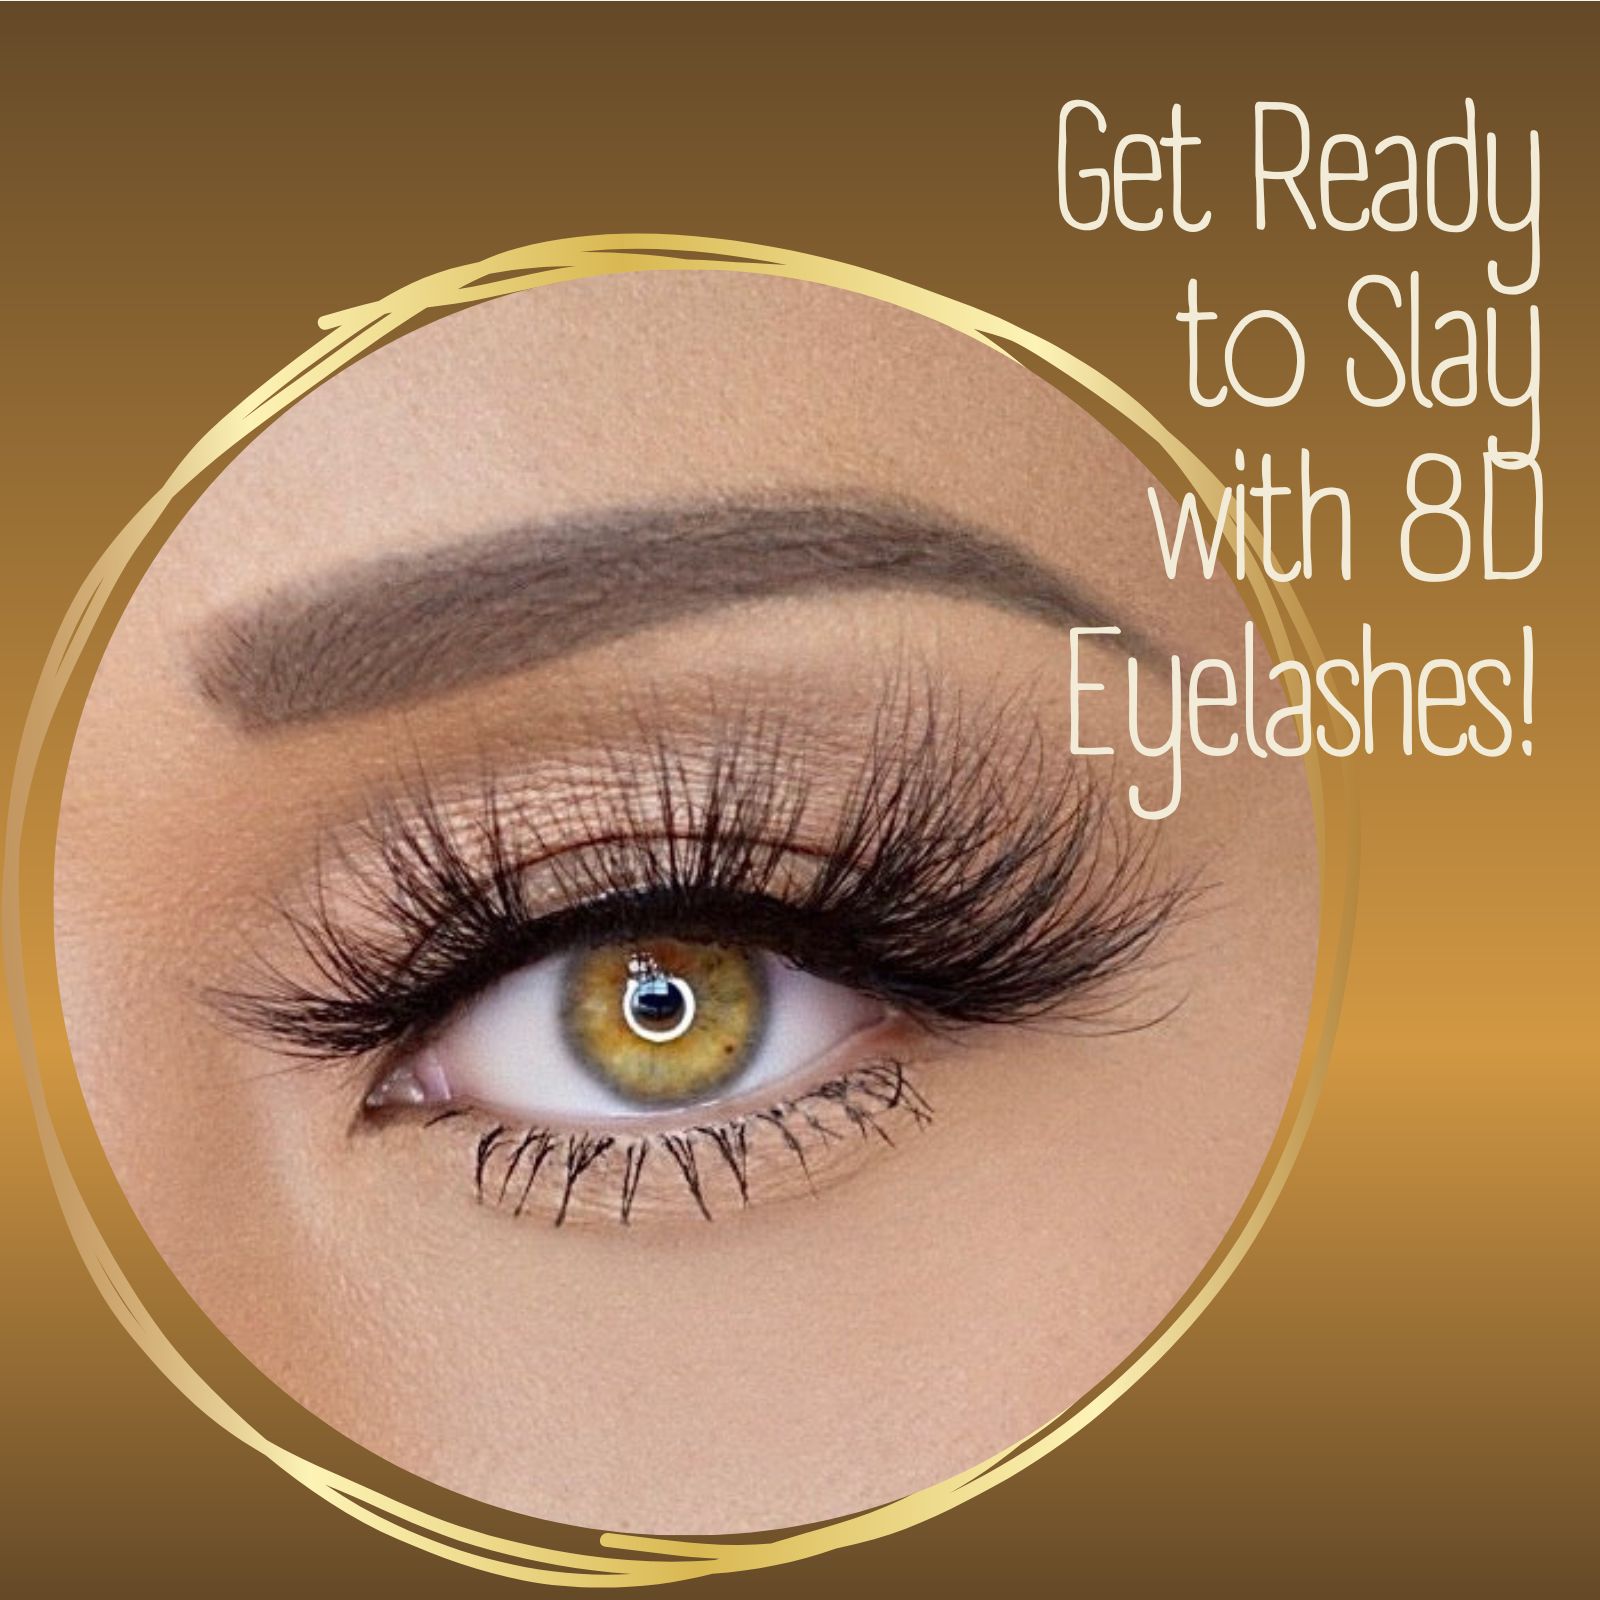 Get Ready to Slay with 8D Eyelashes